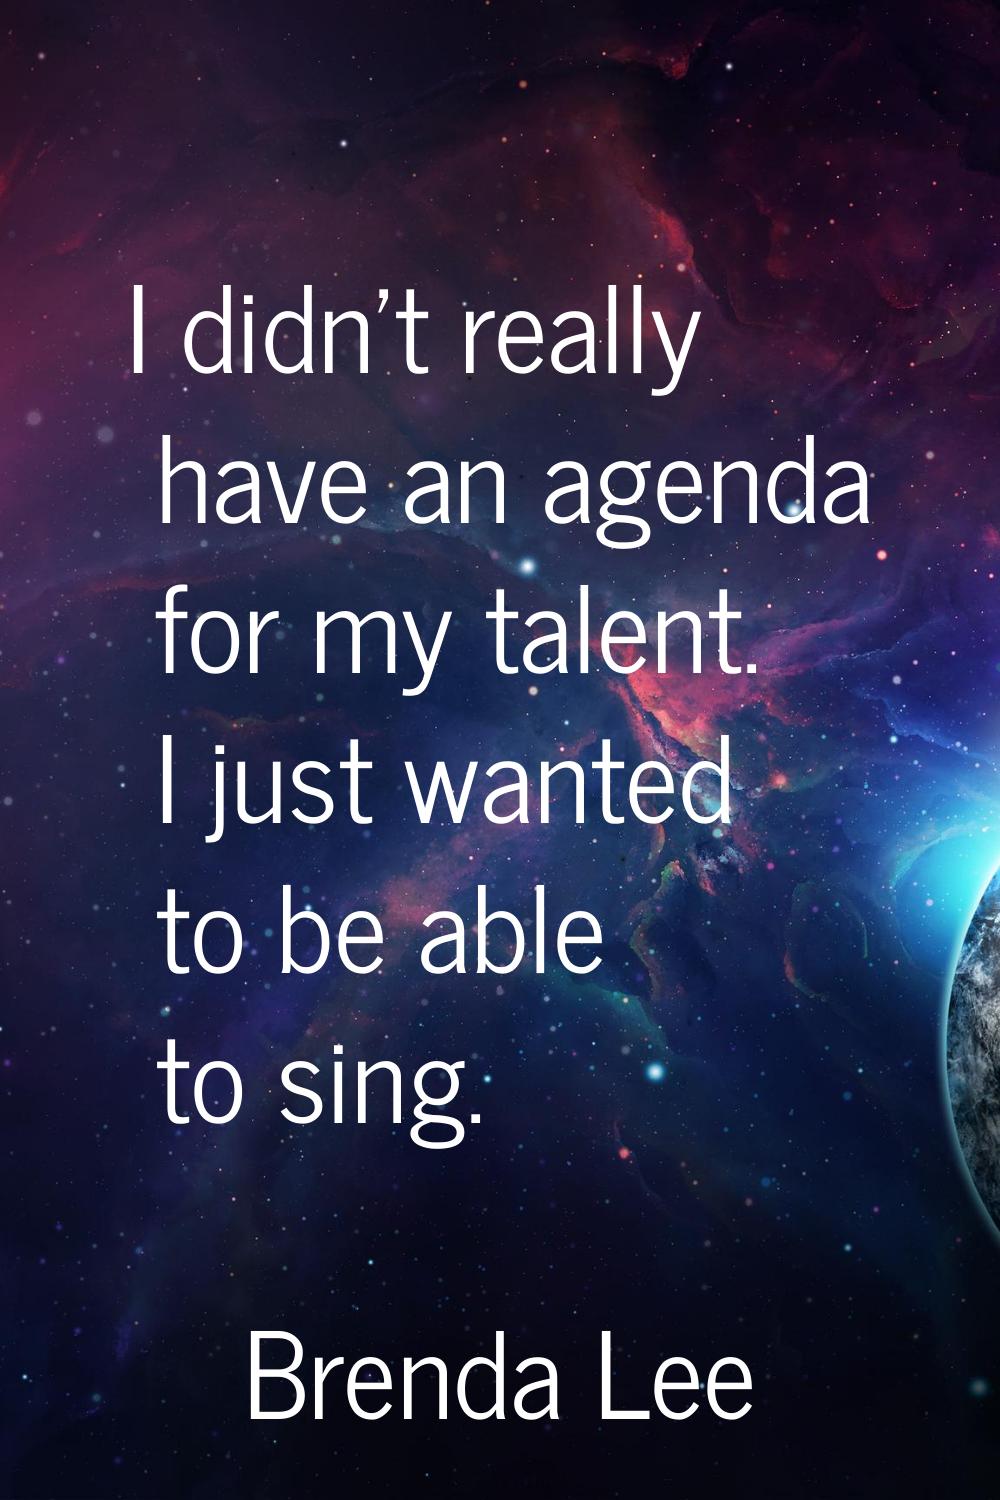 I didn't really have an agenda for my talent. I just wanted to be able to sing.